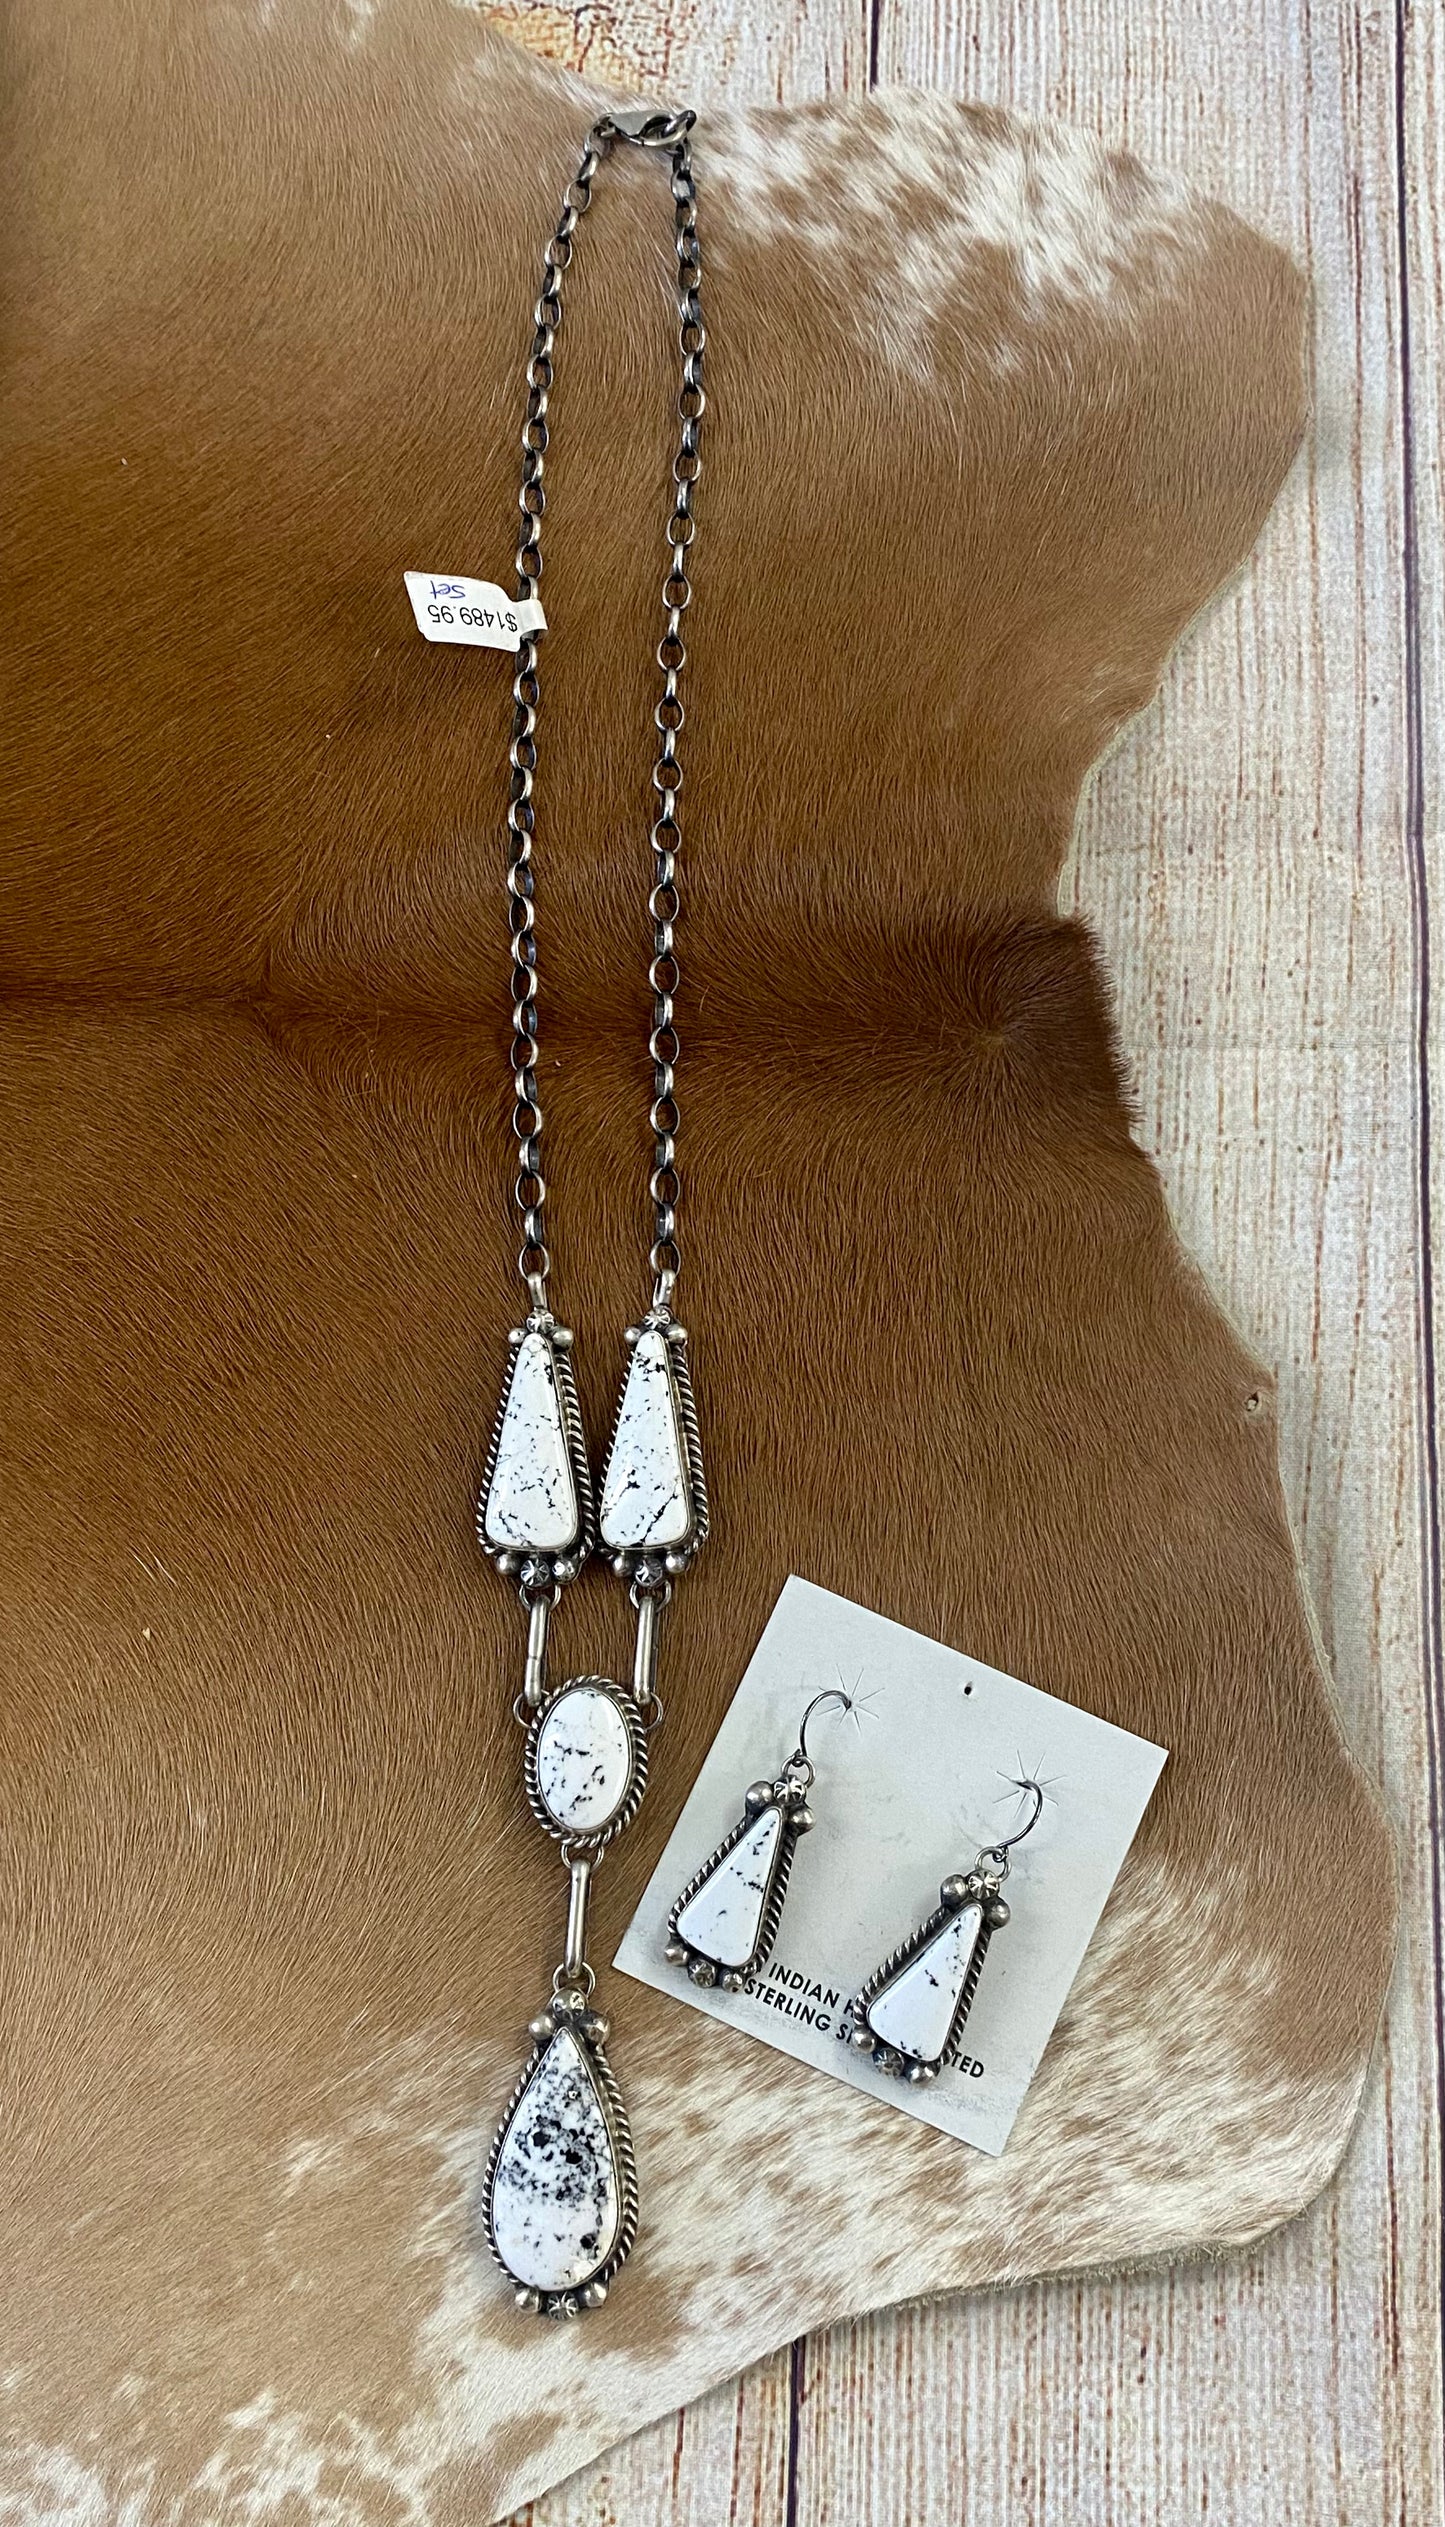 Stunning White Buffalo lariat style sterling silver Native American made necklace and drop hook matching White Buffalo sterling silver earrings set. The perfect jewelry set to gift to your loved one or keep for your own jewelry collection! Both pieces are stamped sterling and signed on the back by talented artist silversmith Annie Spencer.   Size: 27” inches in length necklace + 1 1/2” inch earrings   Stone: White Buffalo  Signed: YES "AL"  Artist / Hallmark: Annie Spencer